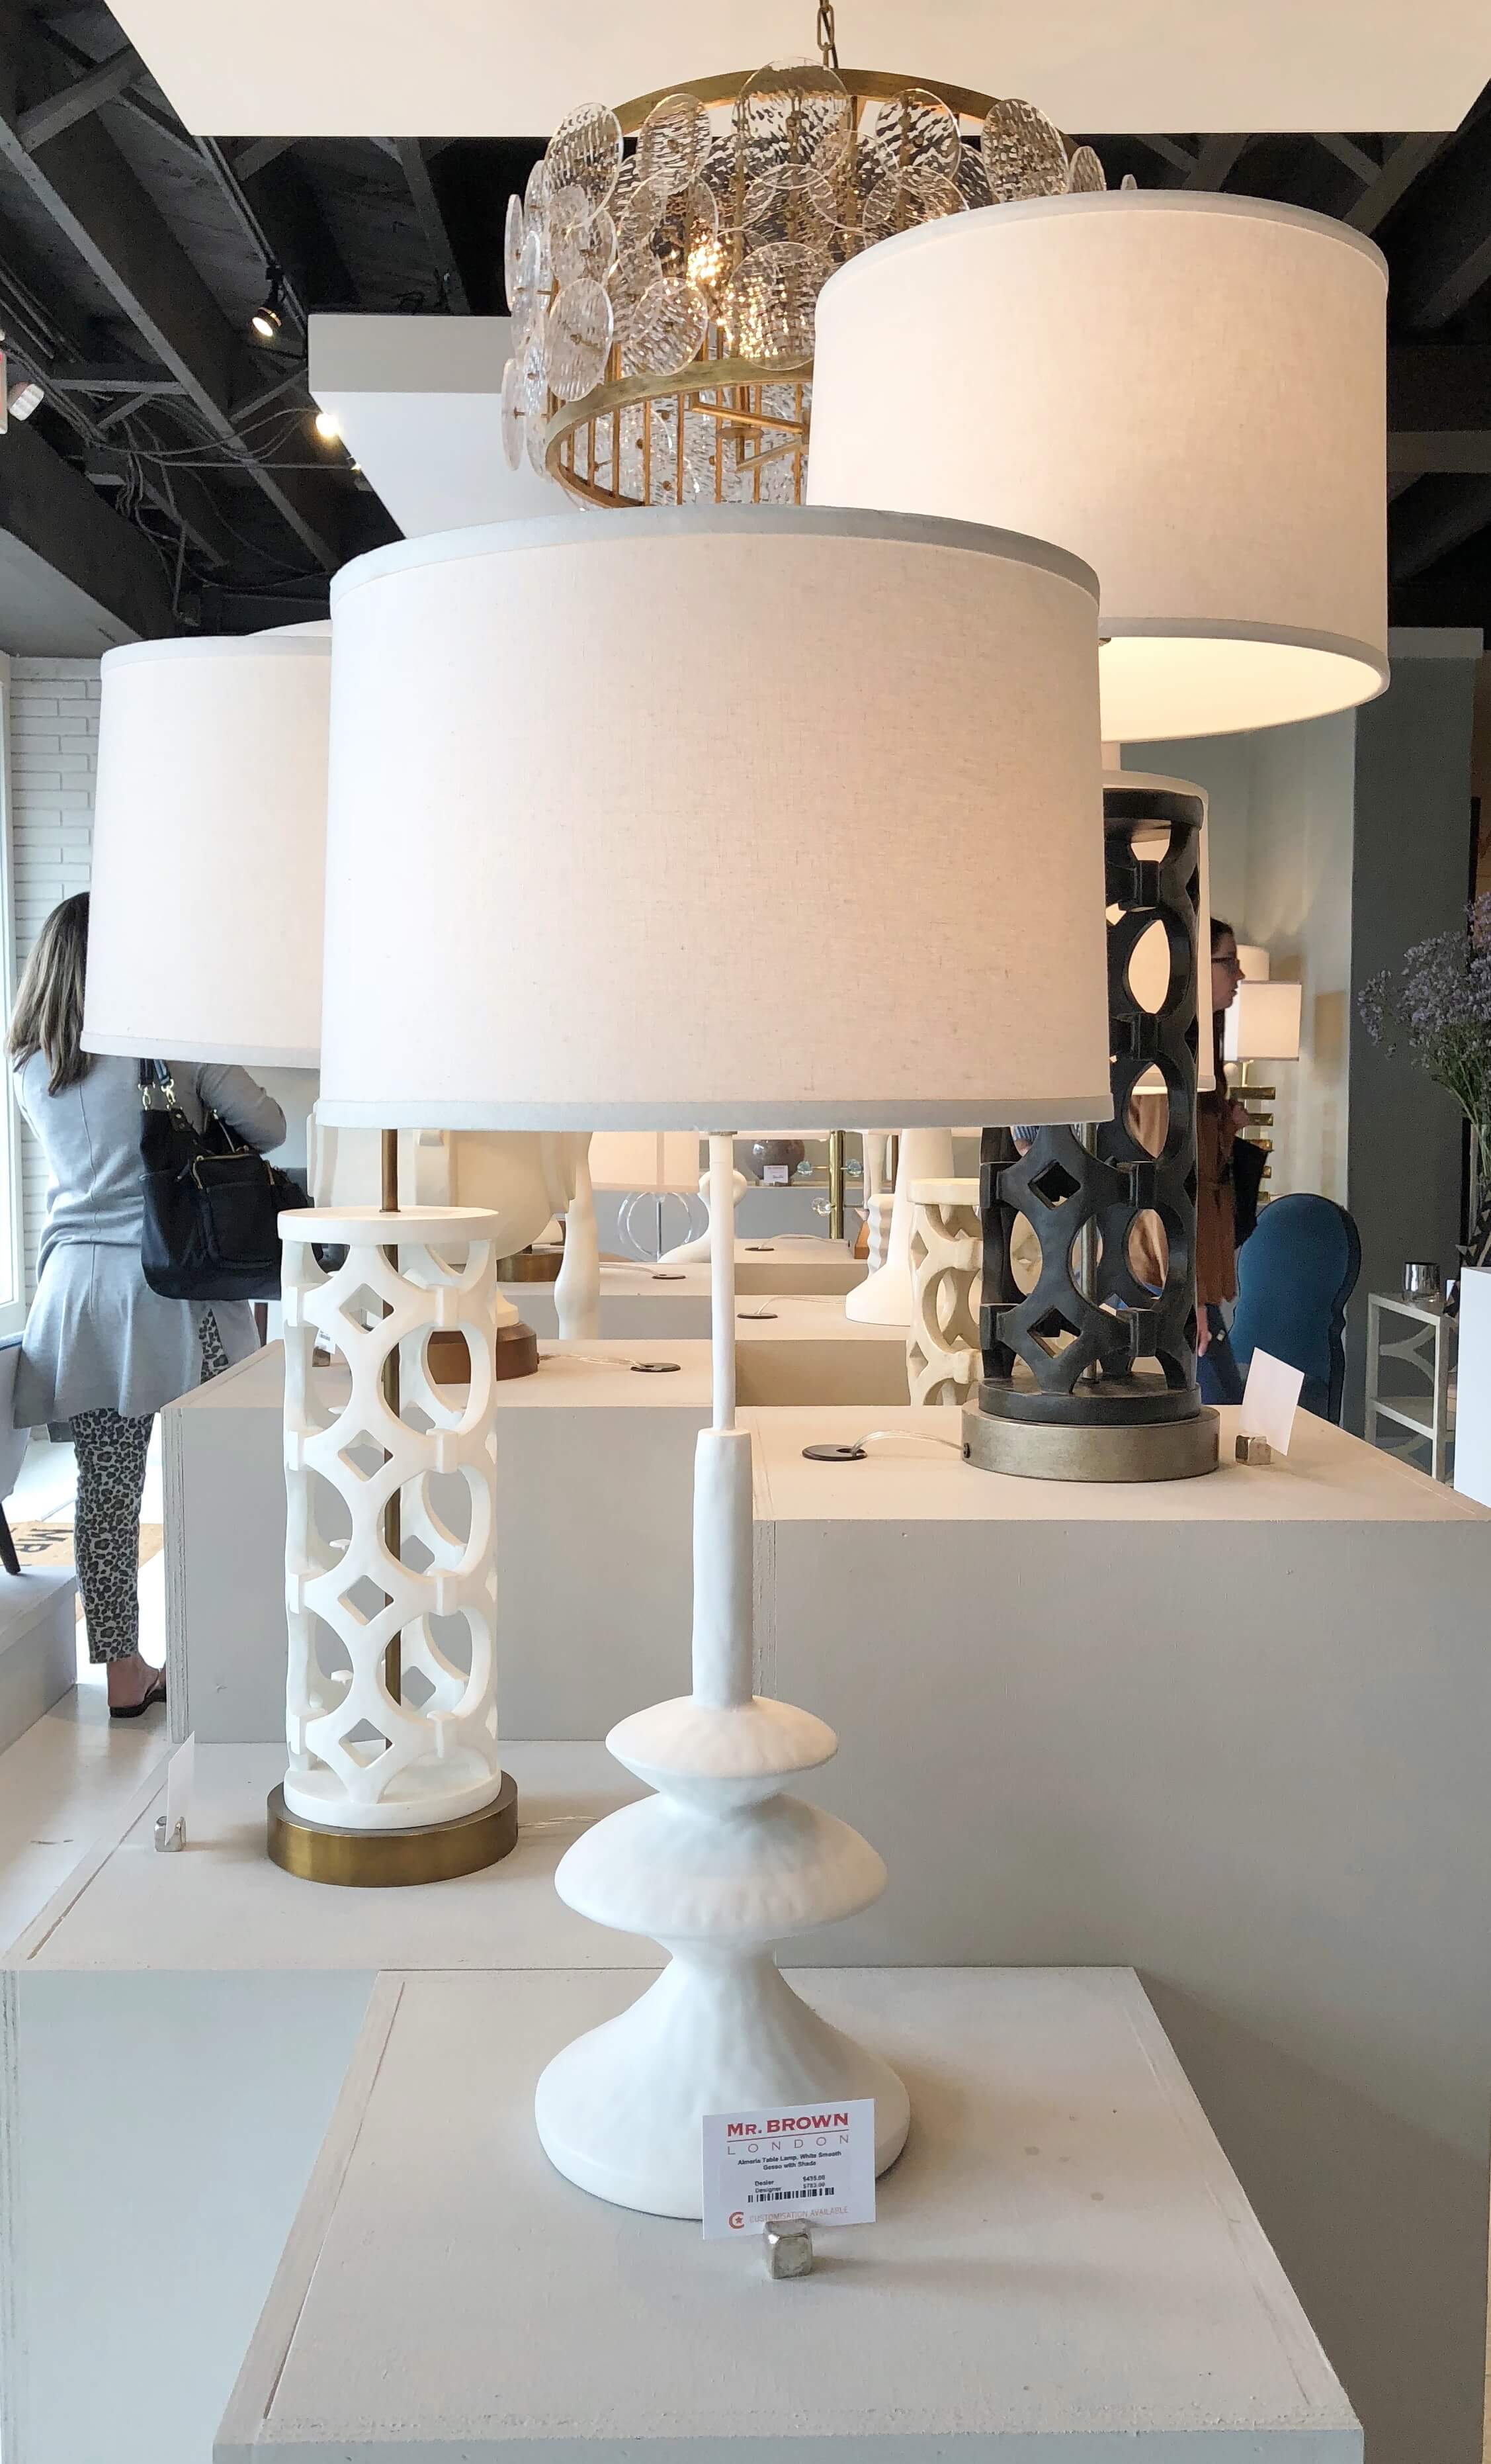 ON TREND - White Plaster Or Gesso Finished Lighting And Home Decor For A  Fresh, Modern Look! — DESIGNED